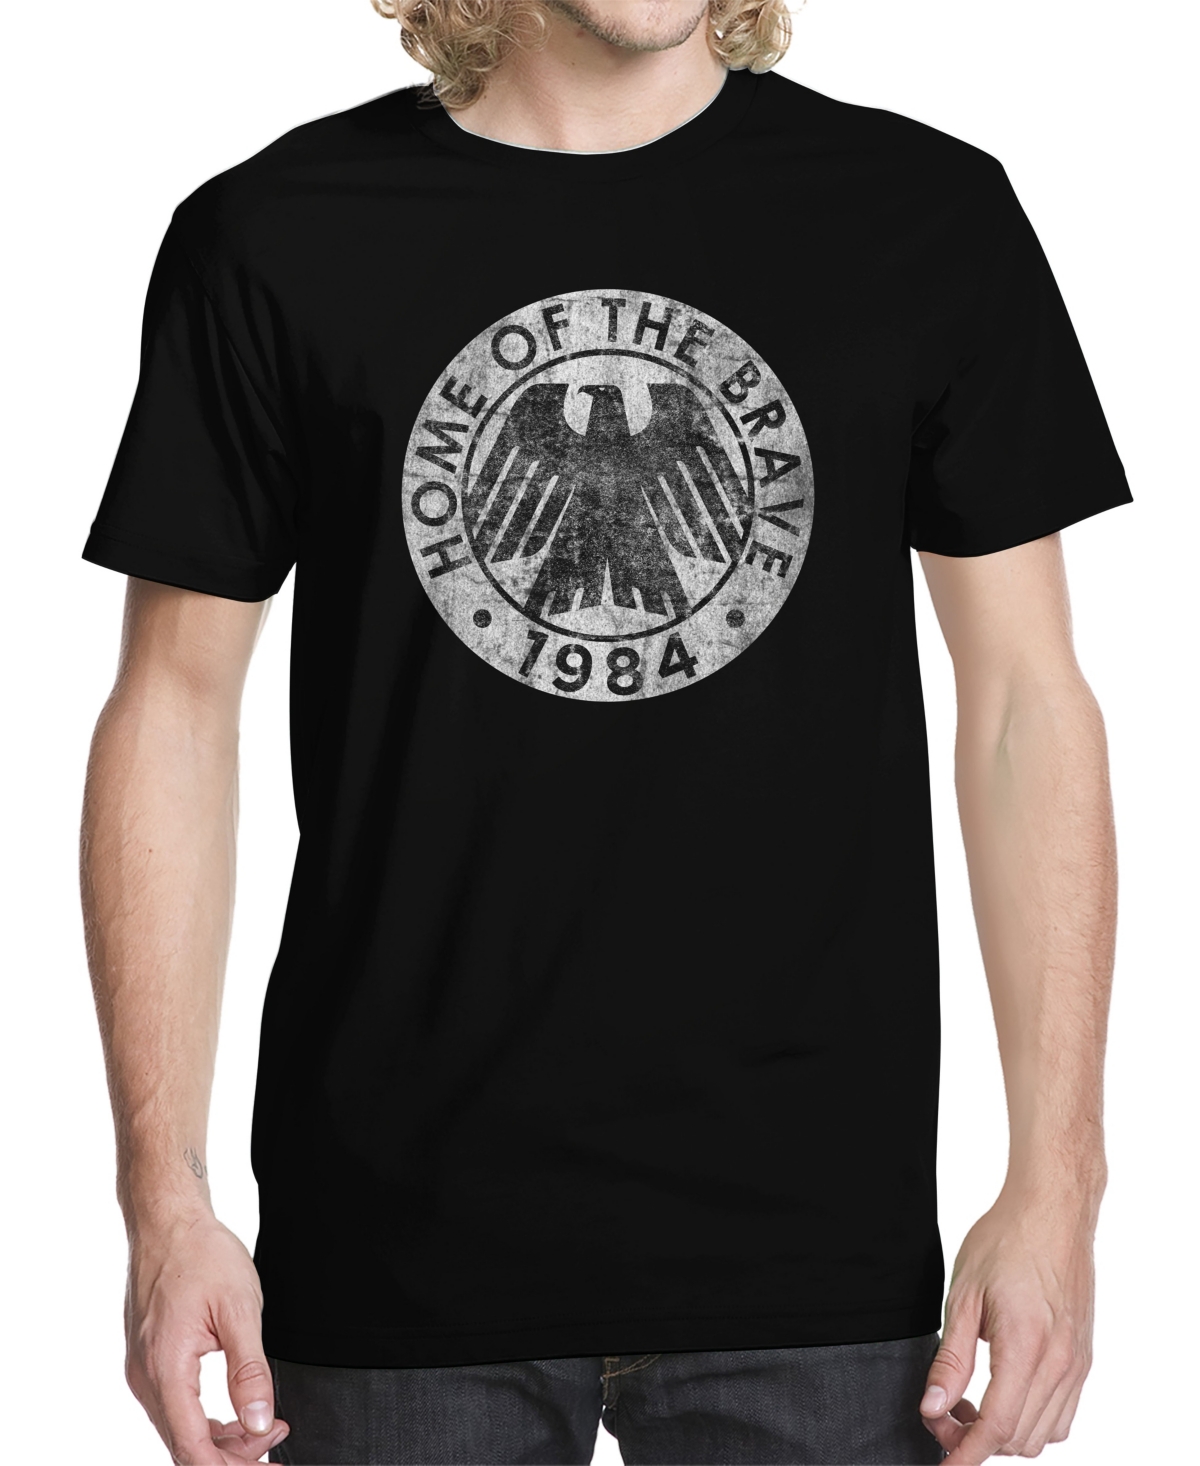 Men's Home Of The Brave 84 Graphic T-shirt - Black